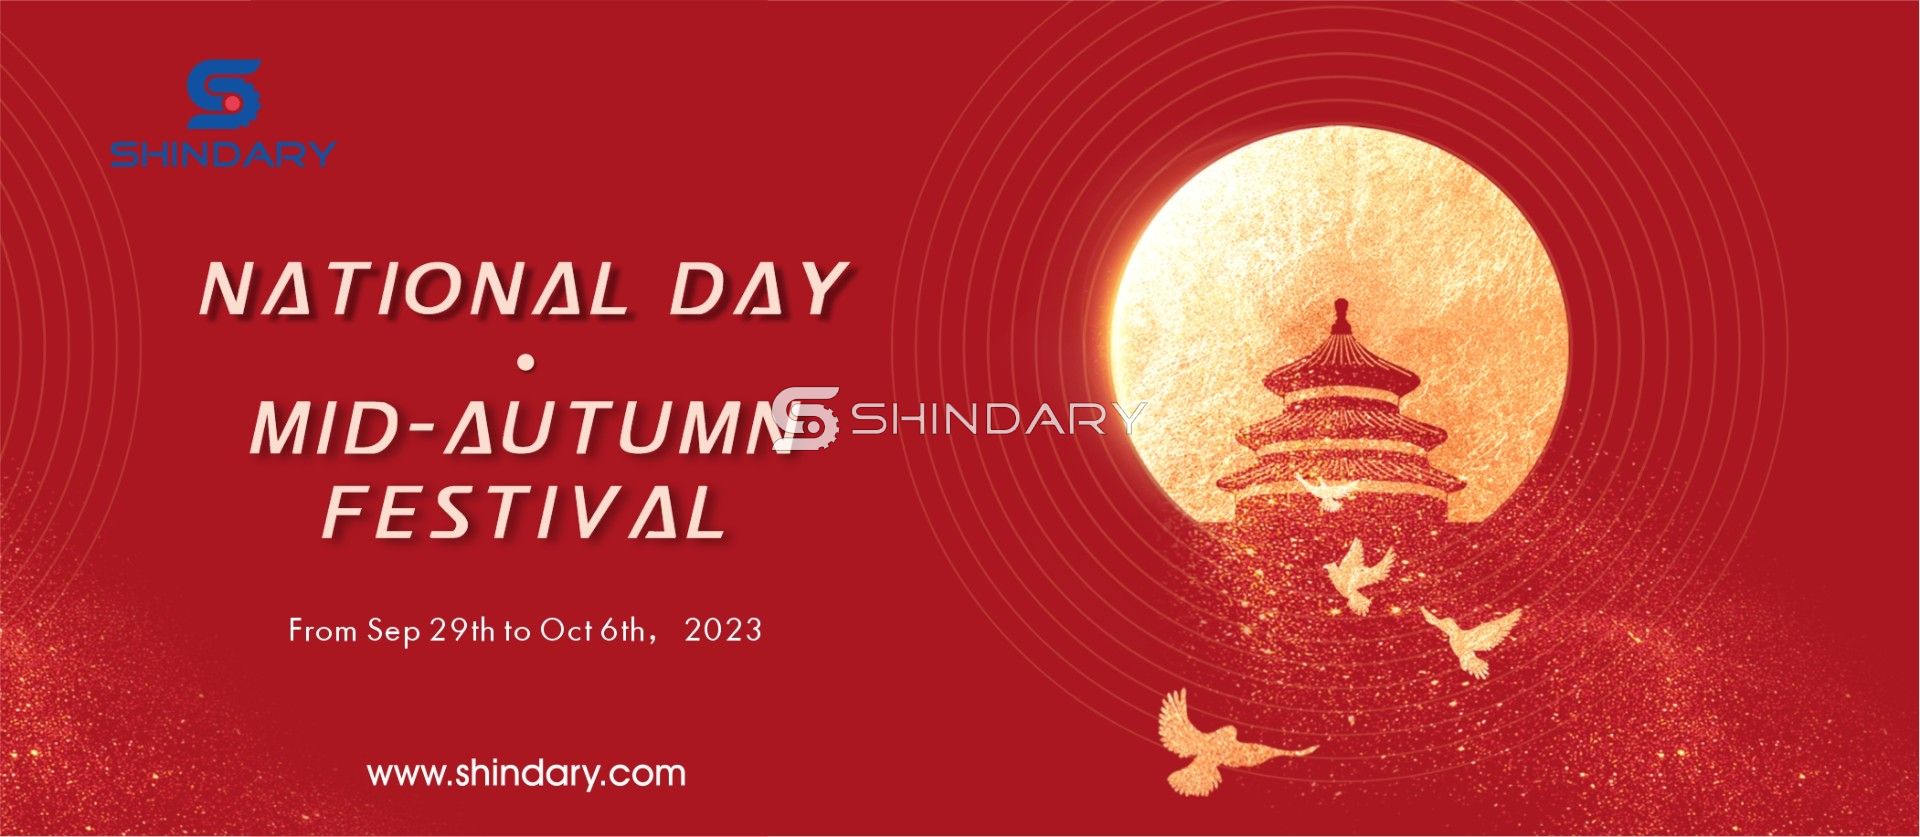 Mid-Autumn Festival and National Day